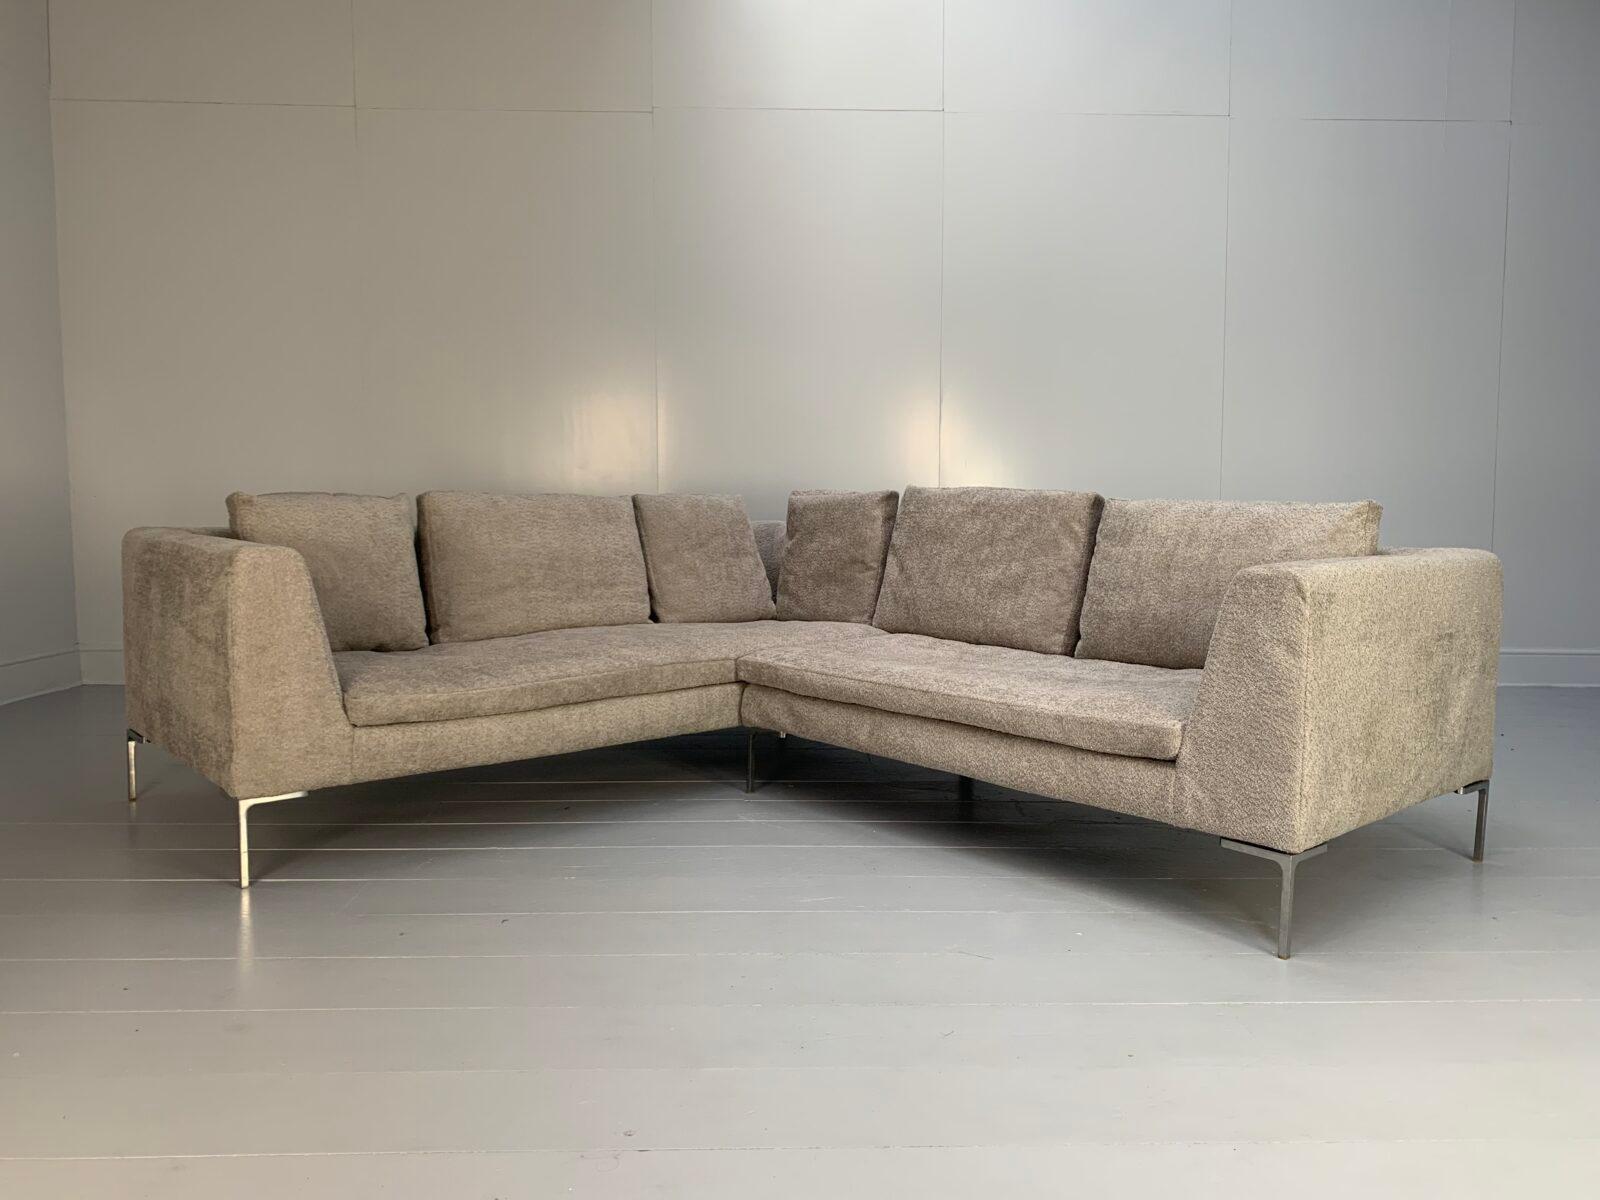 Hello Friends, and welcome to another unmissable offering from Lord Browns Furniture, the UK’s premier resource for fine Sofas and Chairs.

On offer on this occasion is an iconic “Charles” Sectional L-Shape Sofa (consisting of a CH228 section and a